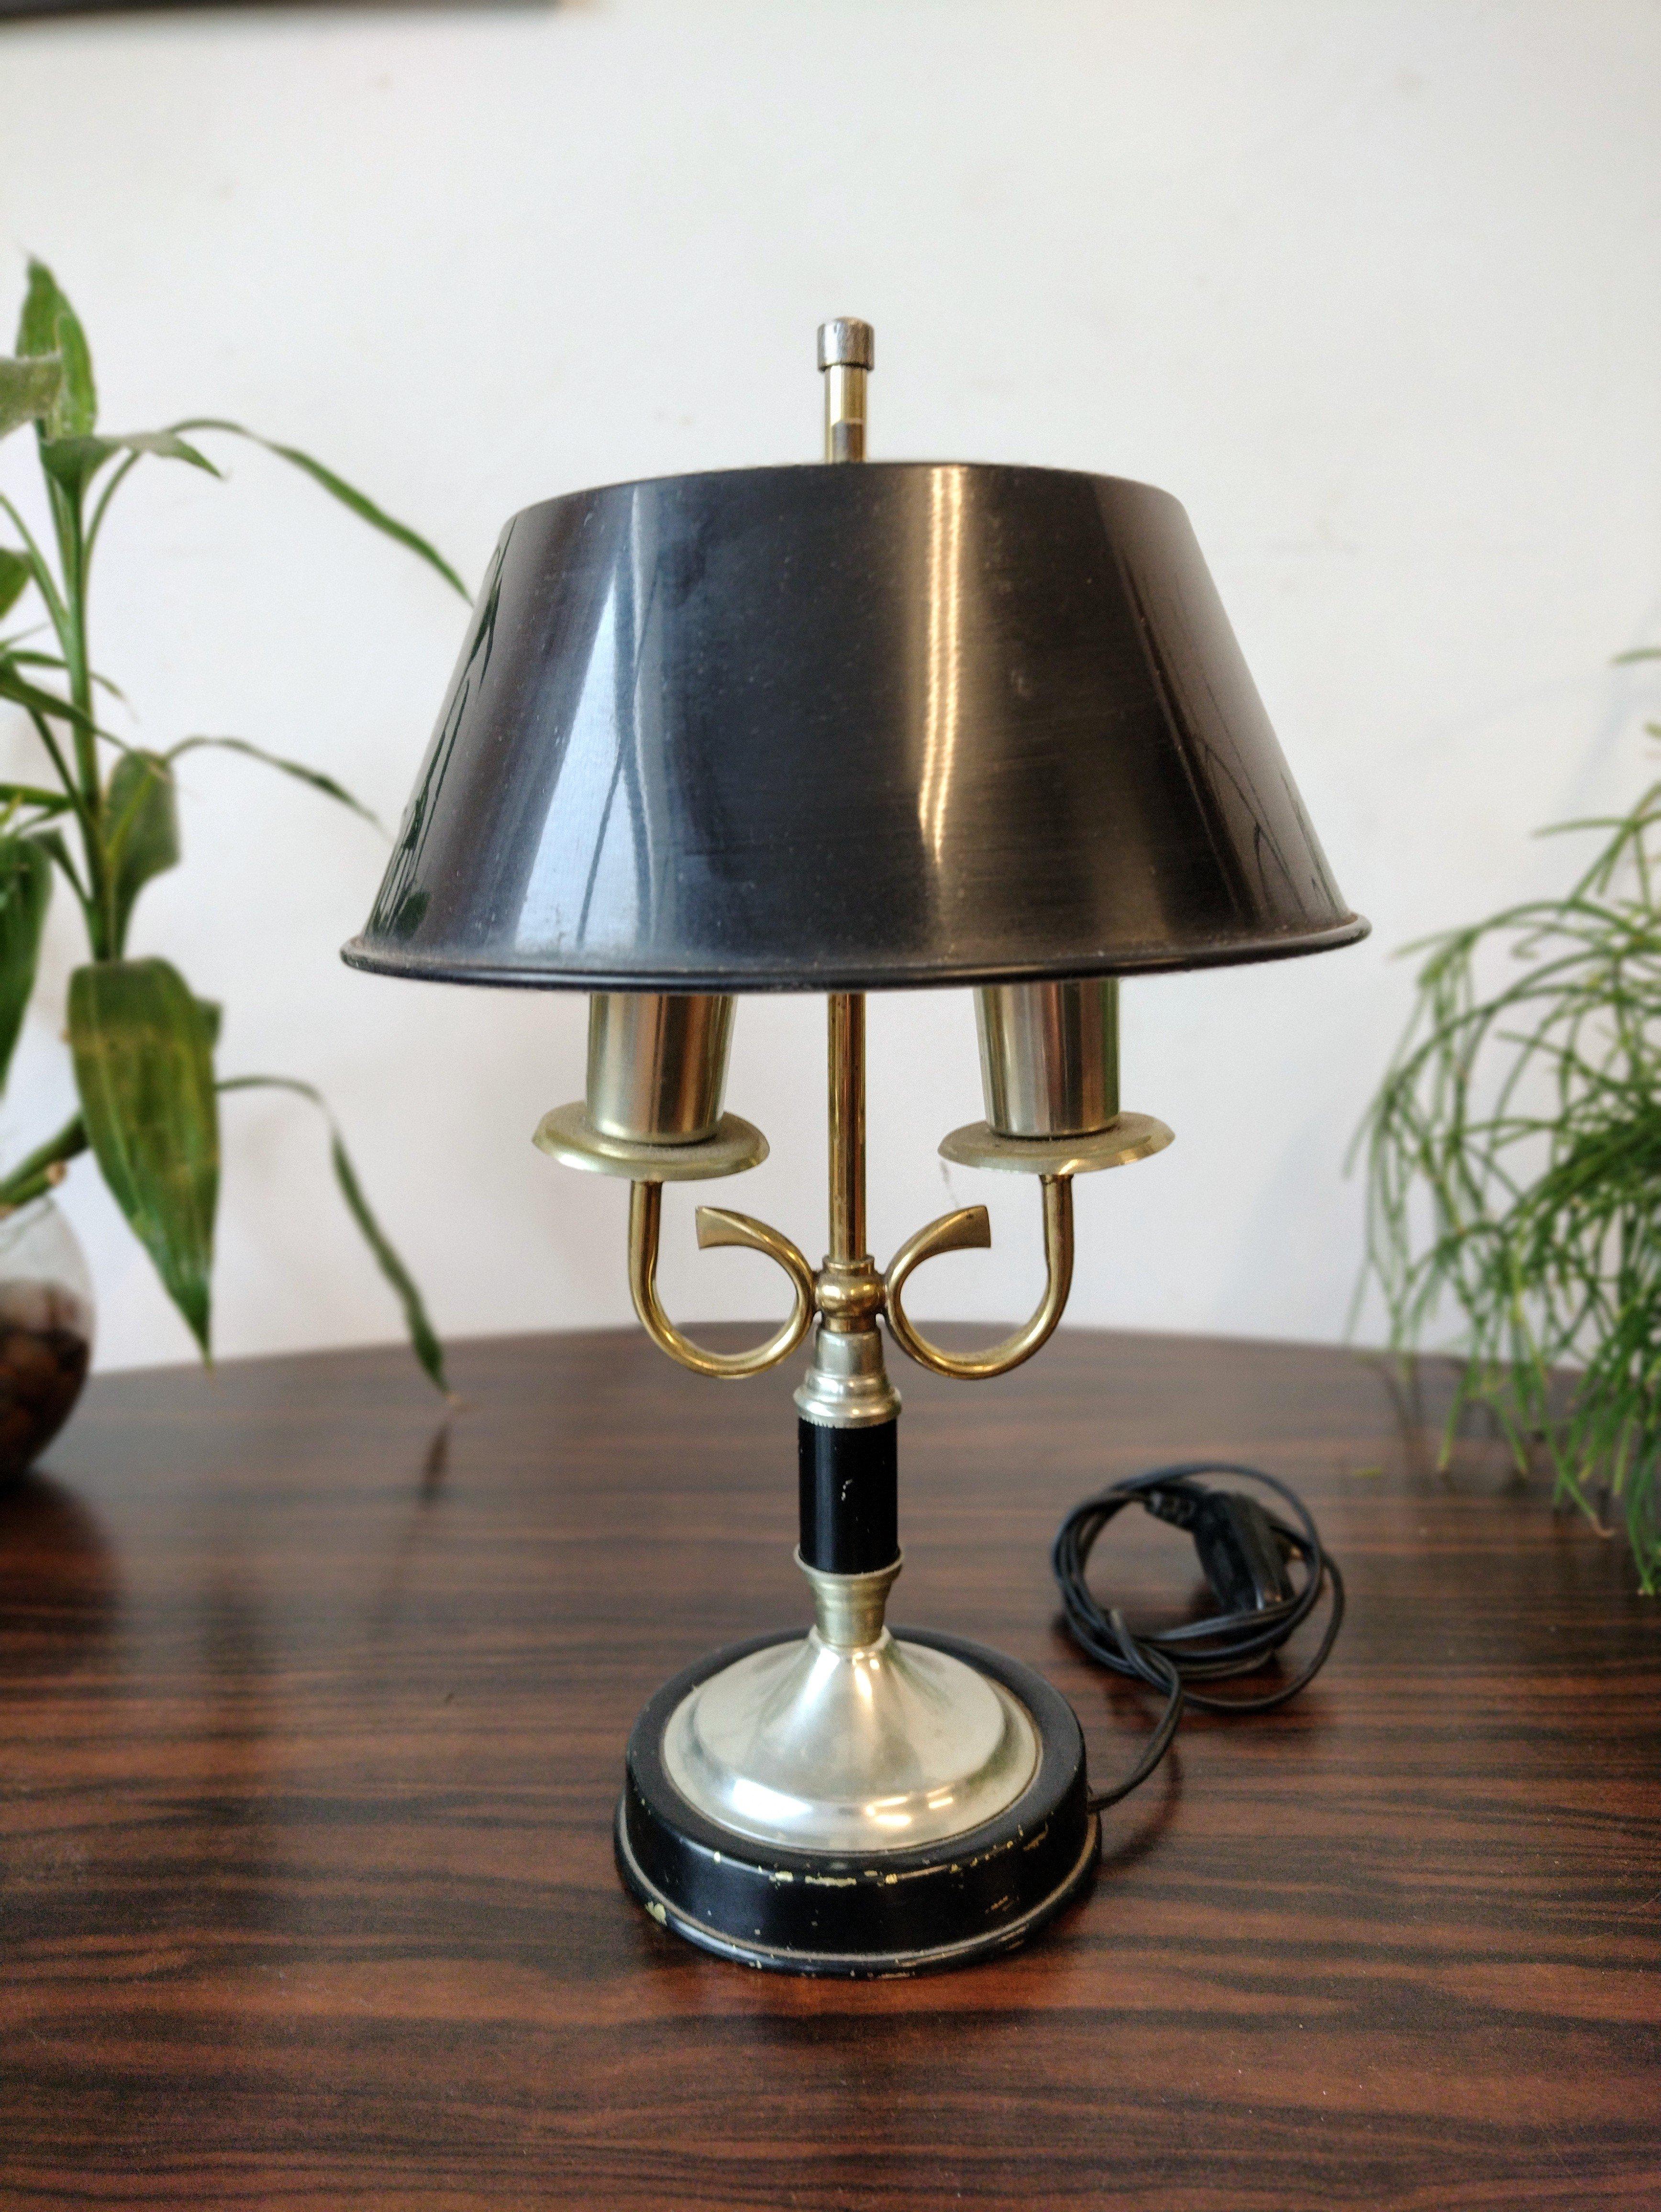 French style Bouillotte table lamp with 2 lights and navy blue metal shade. It has fixed dome and black wire with on/off control. Firm and resistant structure. In good condition.

Approximate measures:
Height: 38cm / diameter: 24cm / Wire length: